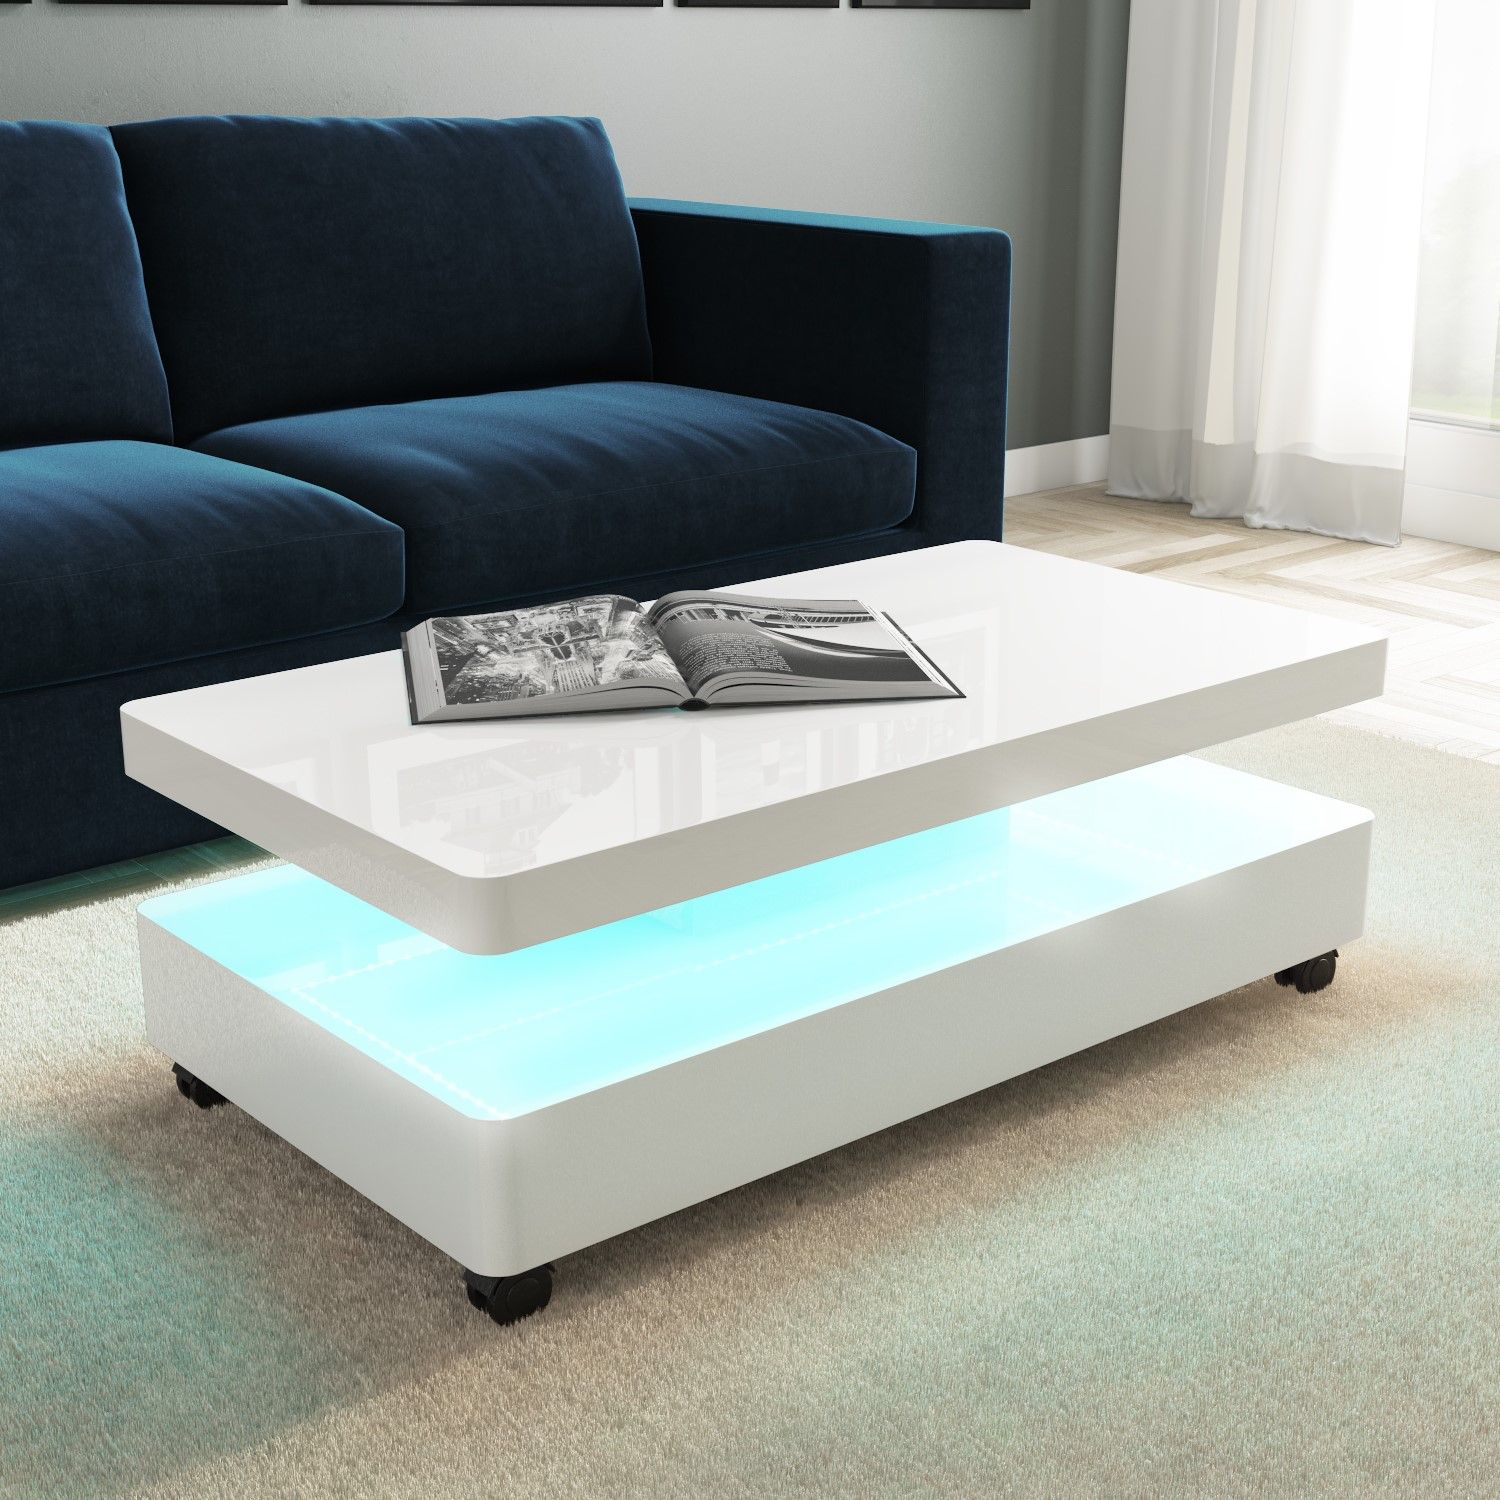 High Gloss White Coffee Table With Led Lighting 5060388562168 | Ebay Inside Rectangular Led Coffee Tables (View 11 of 20)